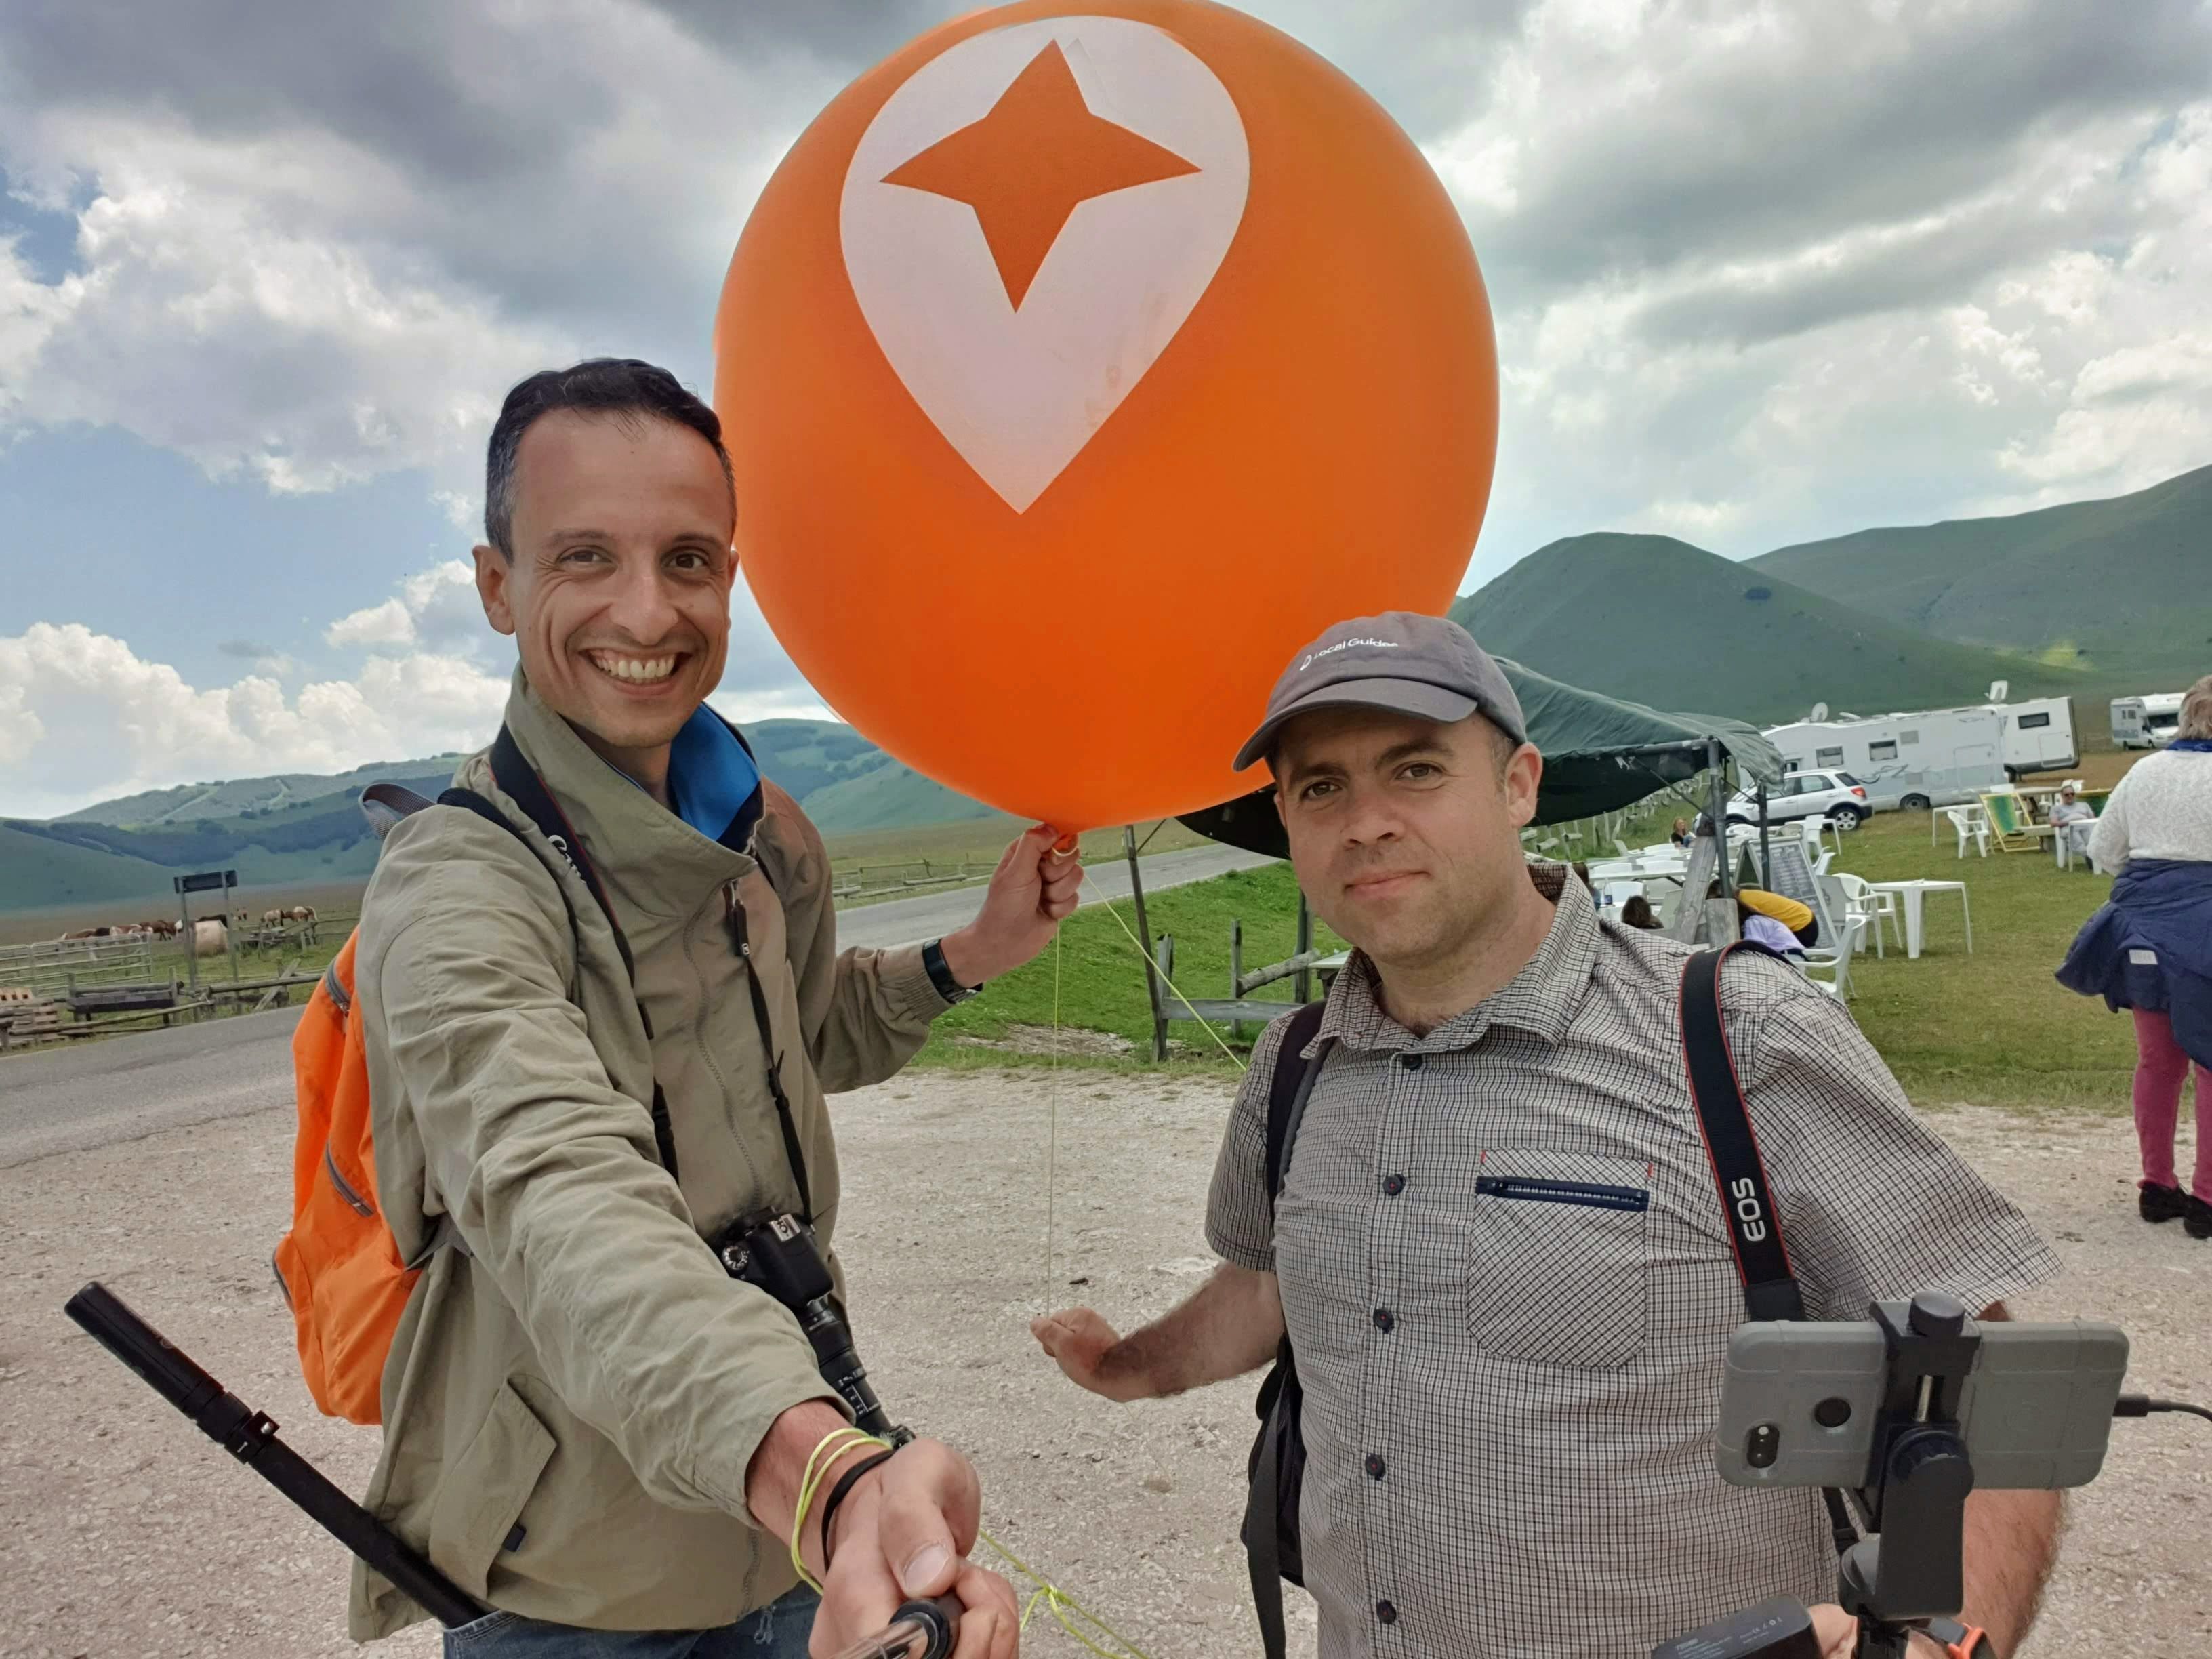 Selfie with @manulele81 and a big Local Guides balloon at the Emanuele's meetup in Castelluccio di Norcia - Local guide @LuigiZ